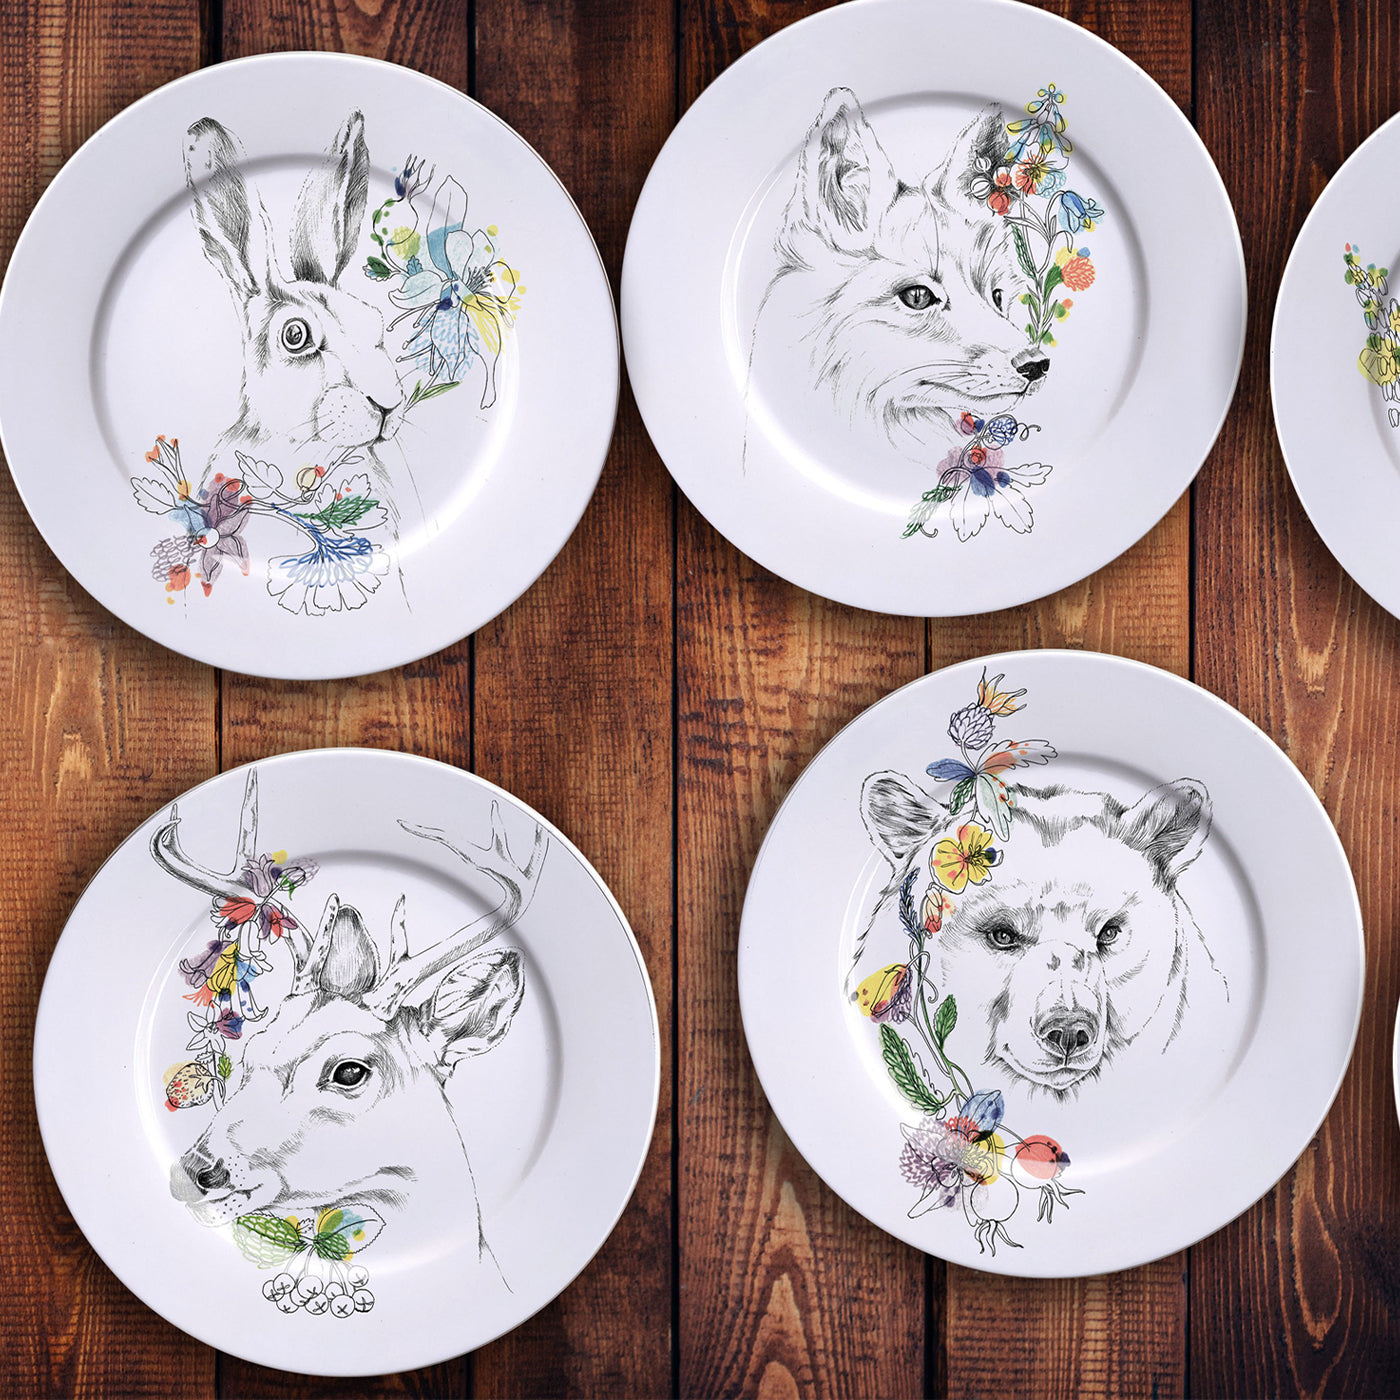 An Ode To The Woods White Tailed Deer Dinner Plate - Alternative view 1